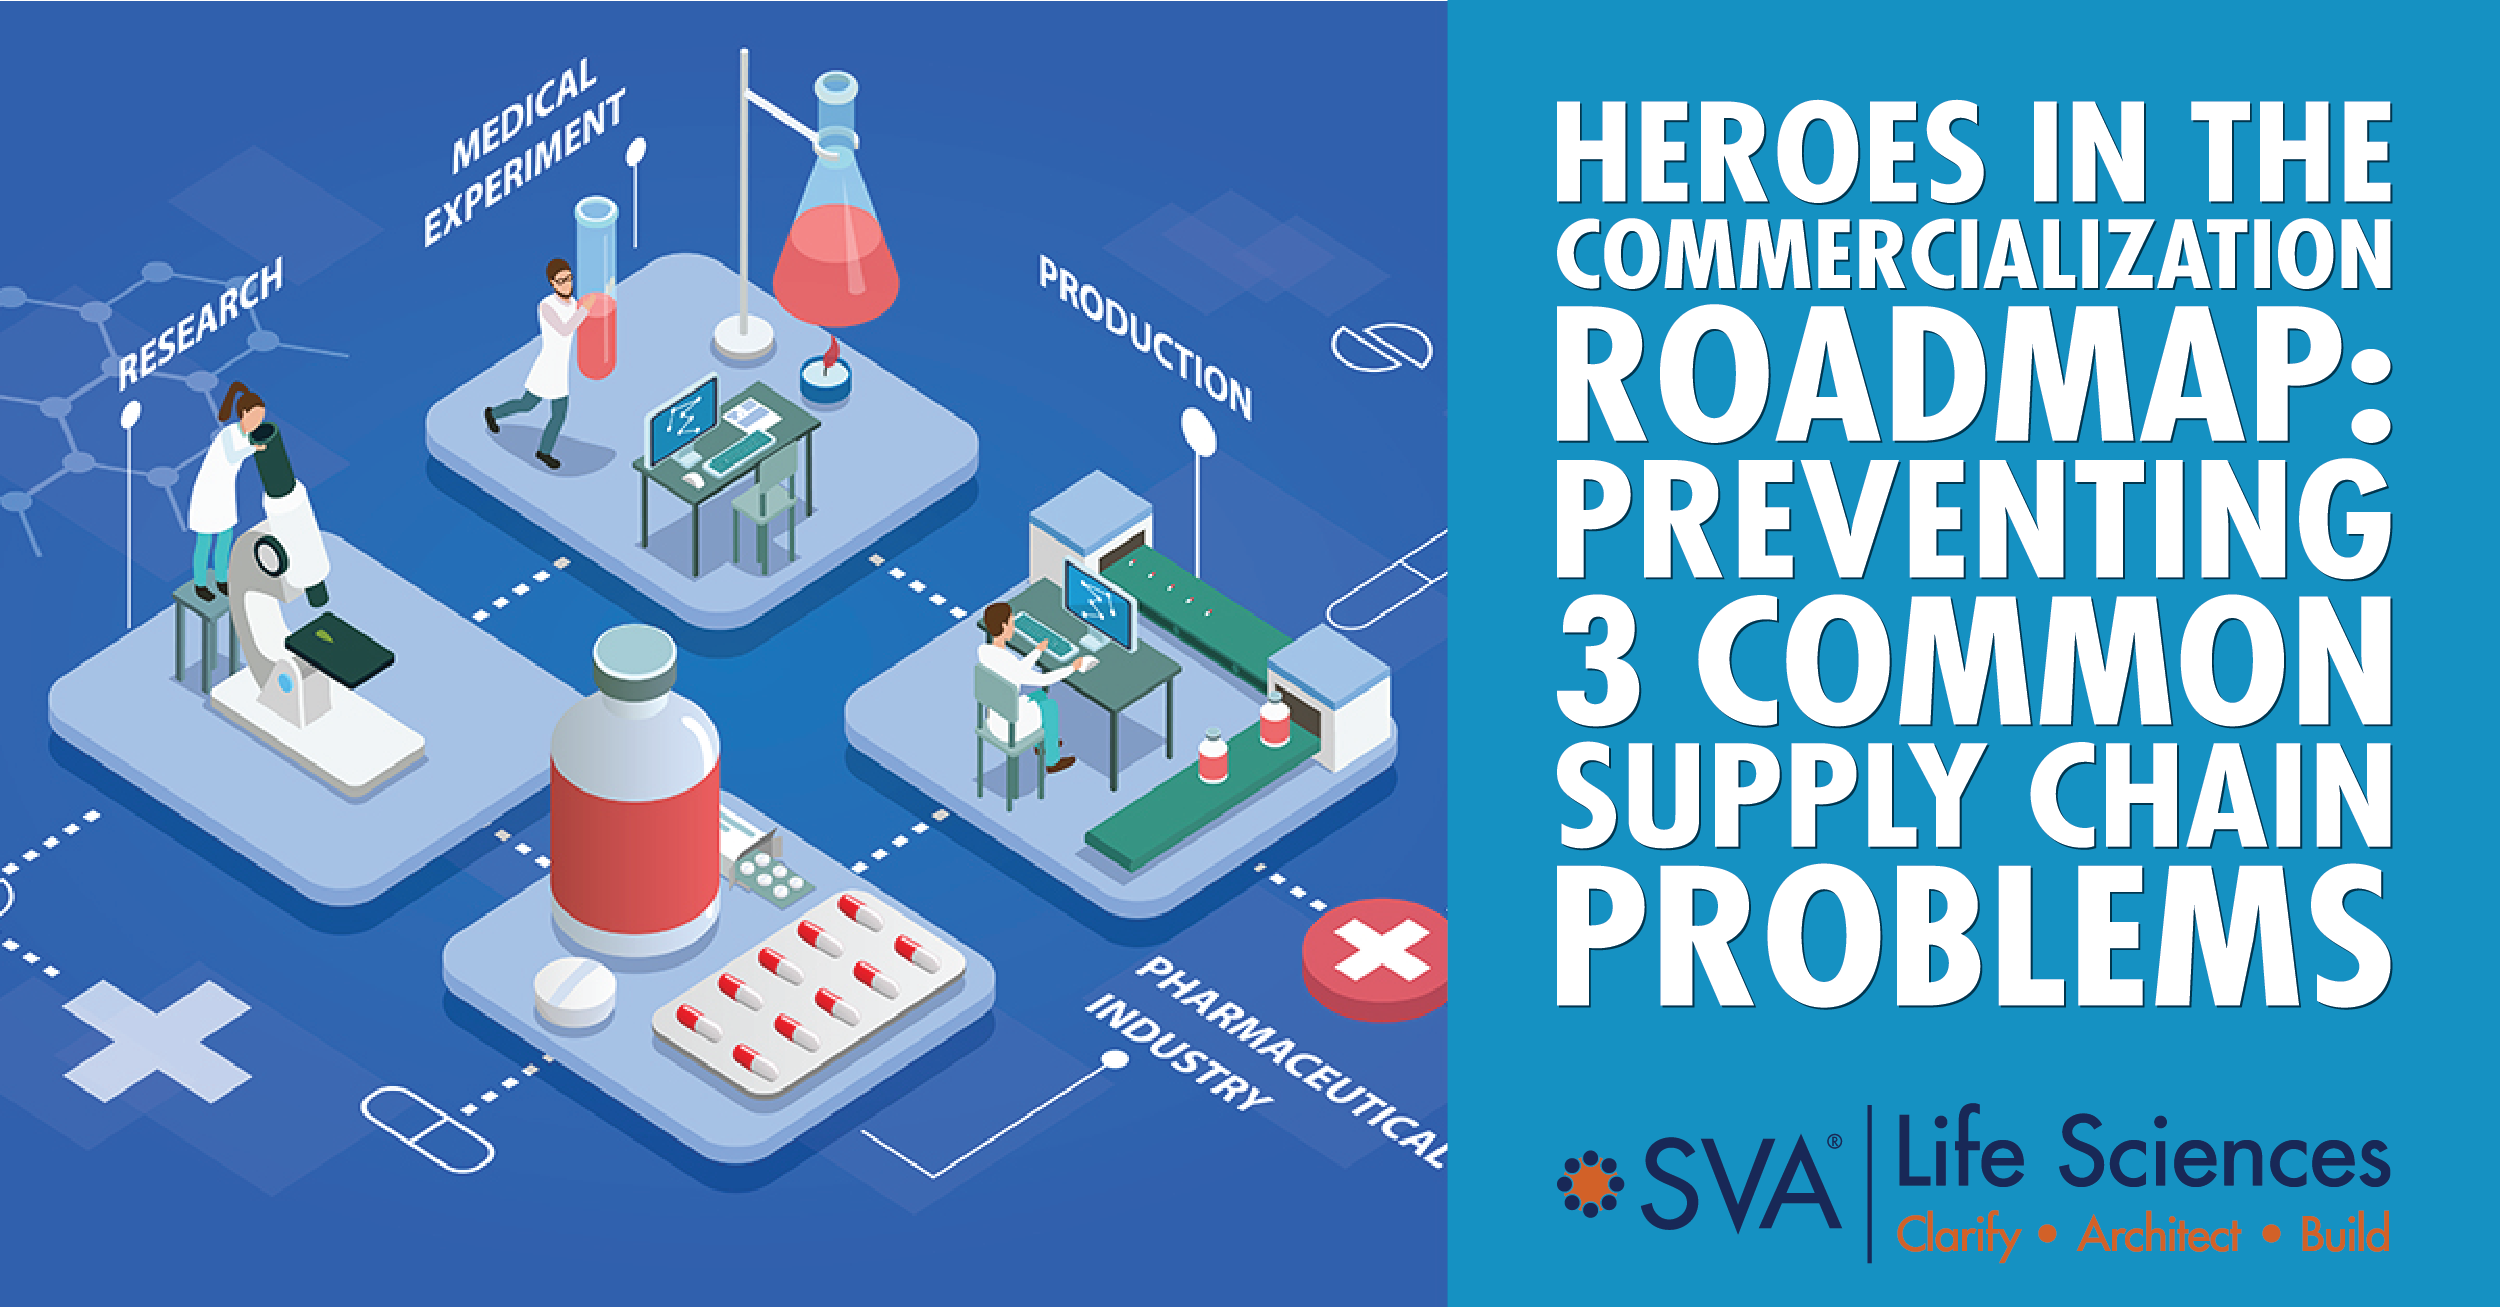 Commercialization: Preventing 3 Common Supply Chain Problems